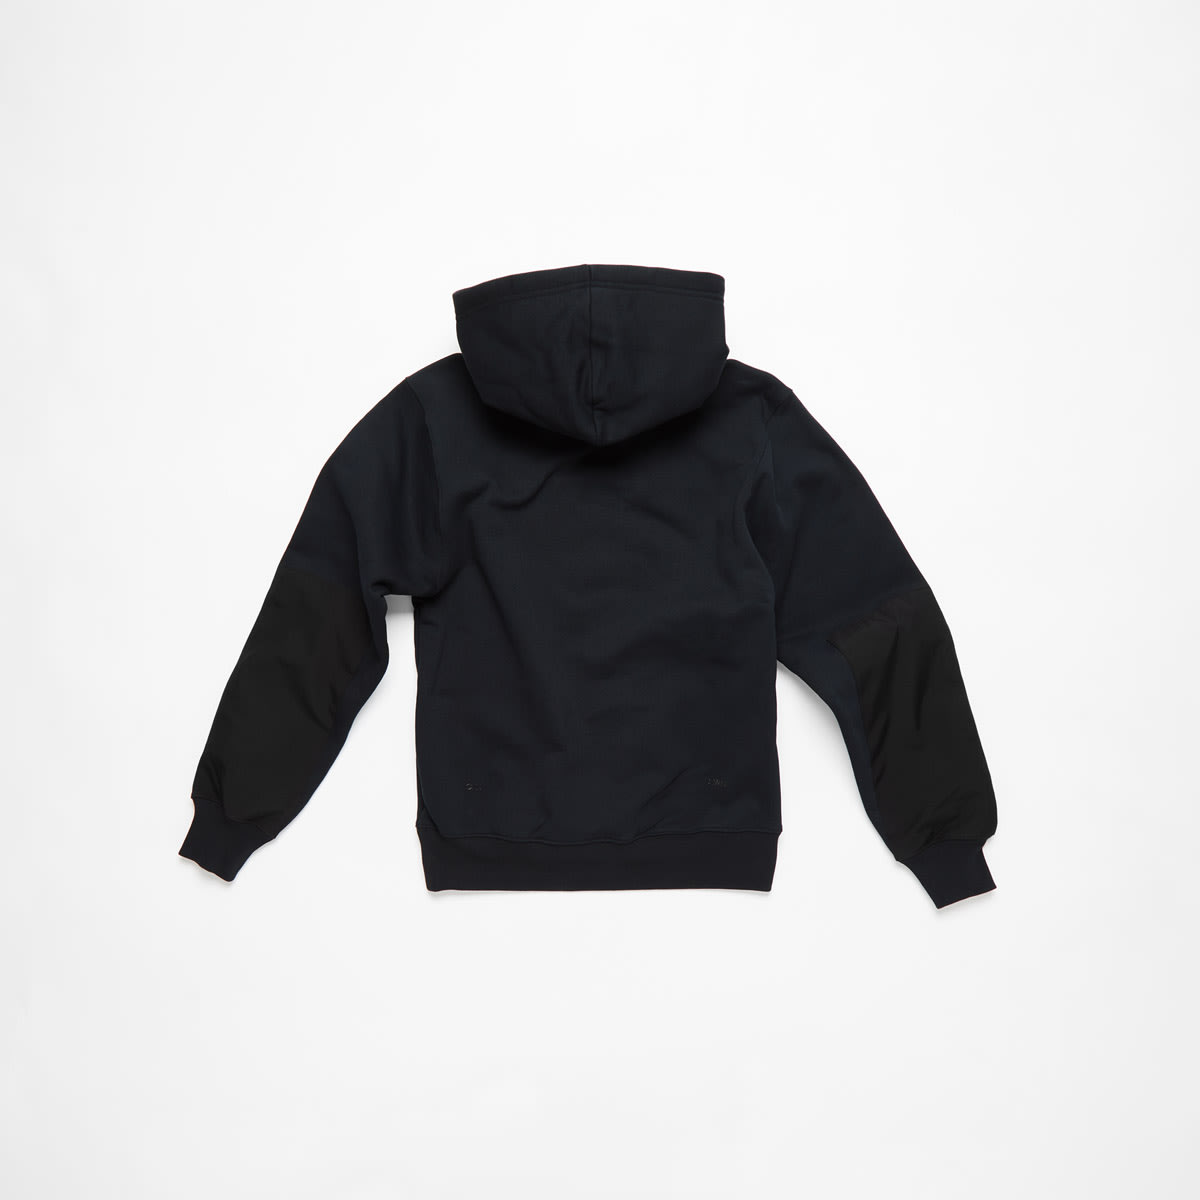 Nike x NOCTA Hoody (Black) | END. Launches